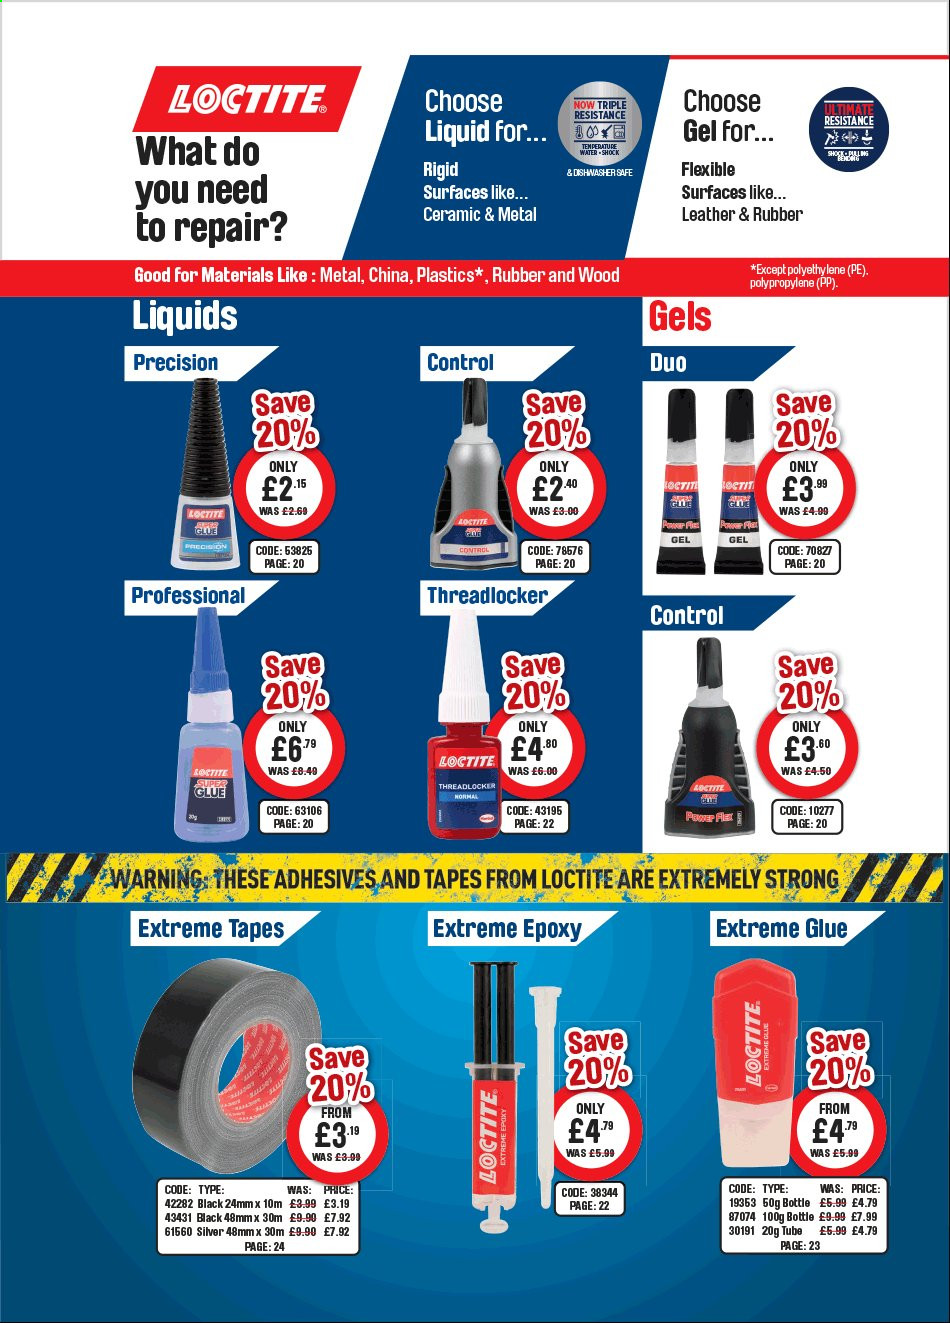 Toolstation offer . Page 21.